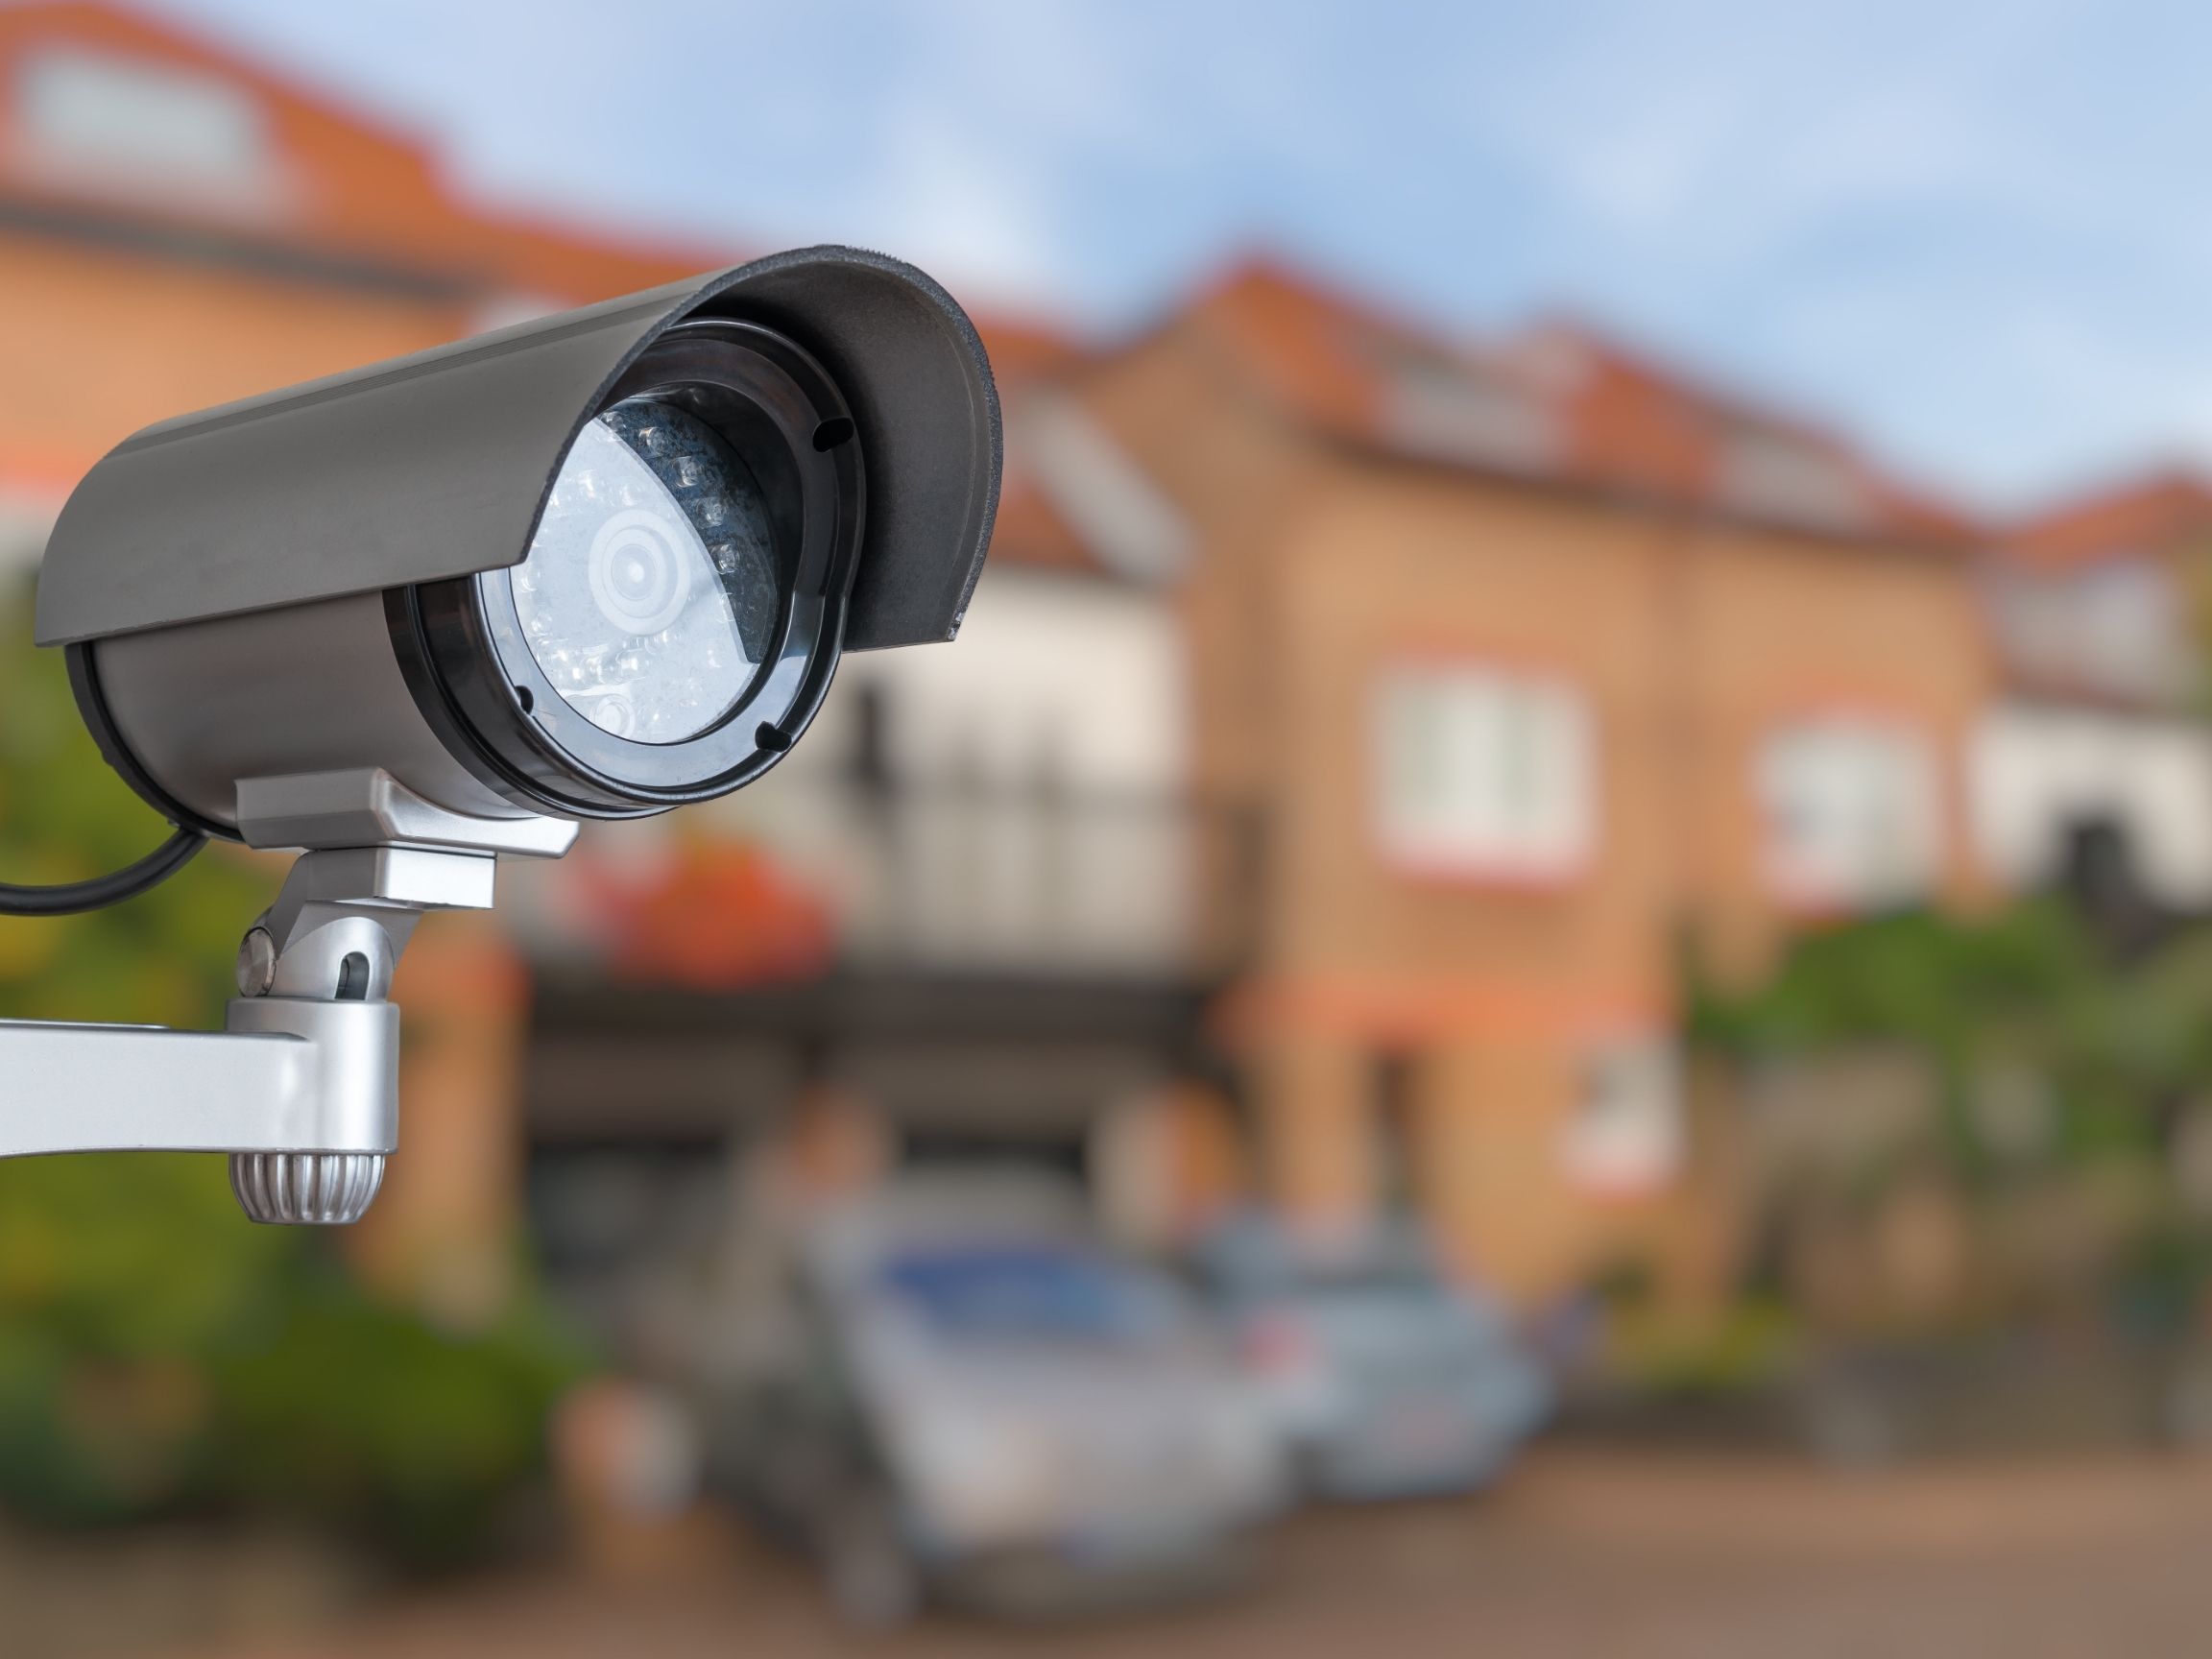 Why You Should Have a Home Surveillance System